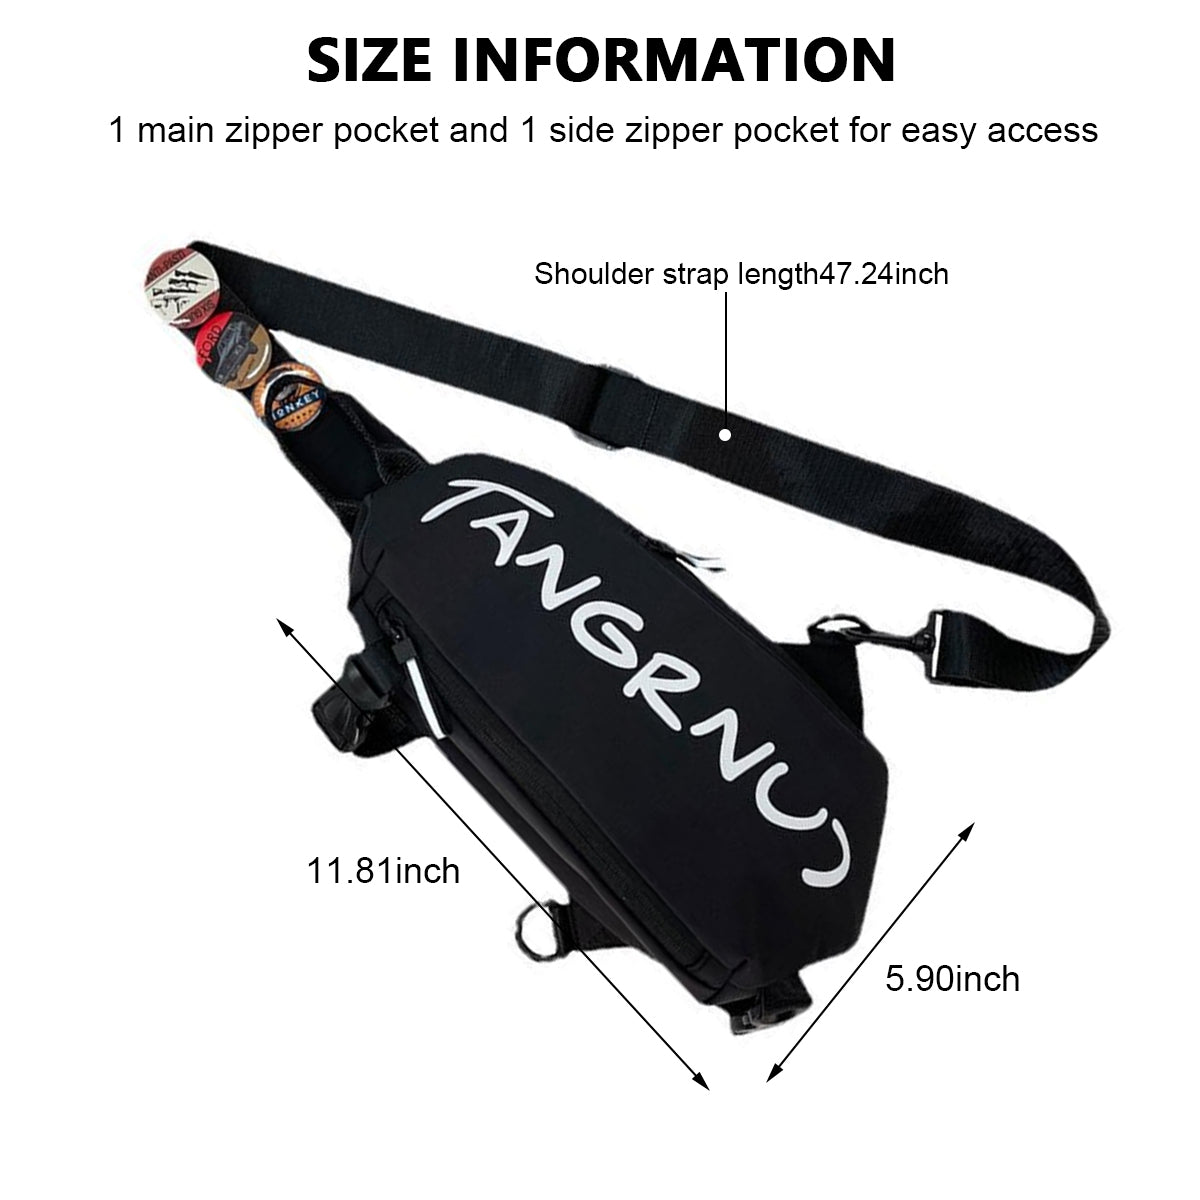 GUSTAVE Crossbody Bag for Men Women with 3Pcs Badges, Waterproof Sling Bag Large Shoulder Bag with Adjustable Strap for Commuting Travel Outdoor Activities Cycling